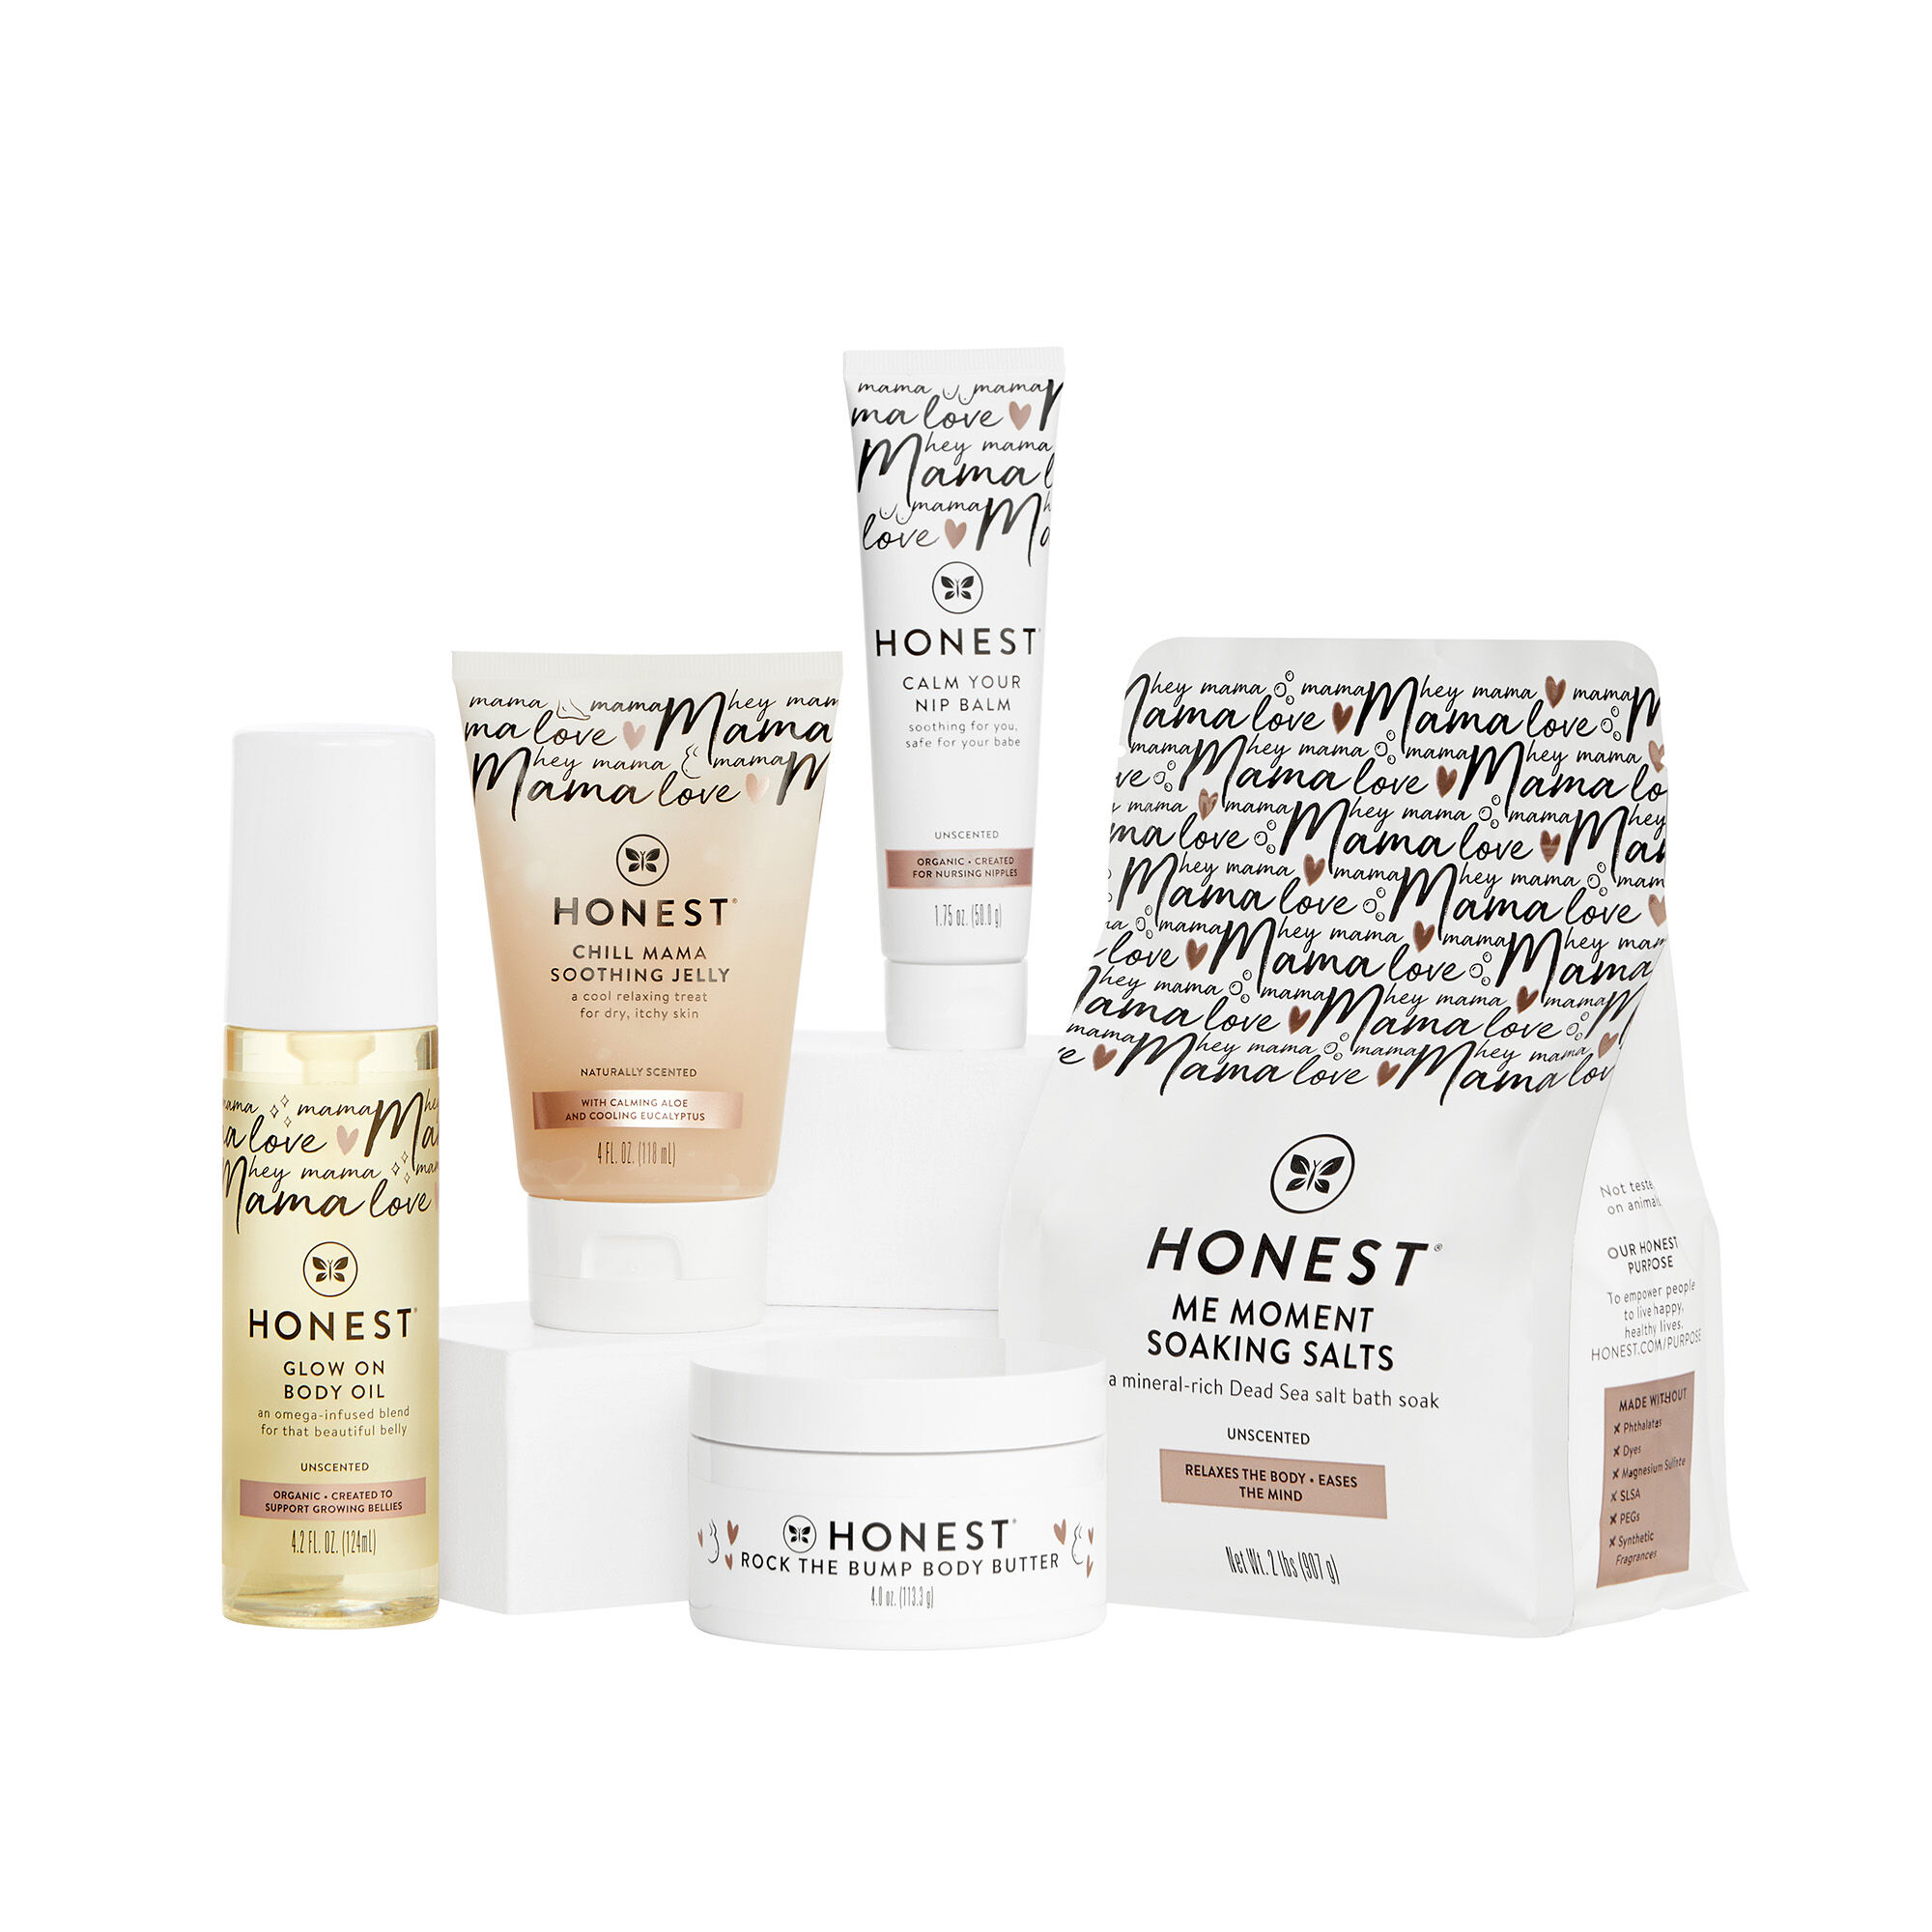 Talm Giftset · Pregnancy and Postpartum essentials - moisturizing skincare  set for mama – Francis & Henry™